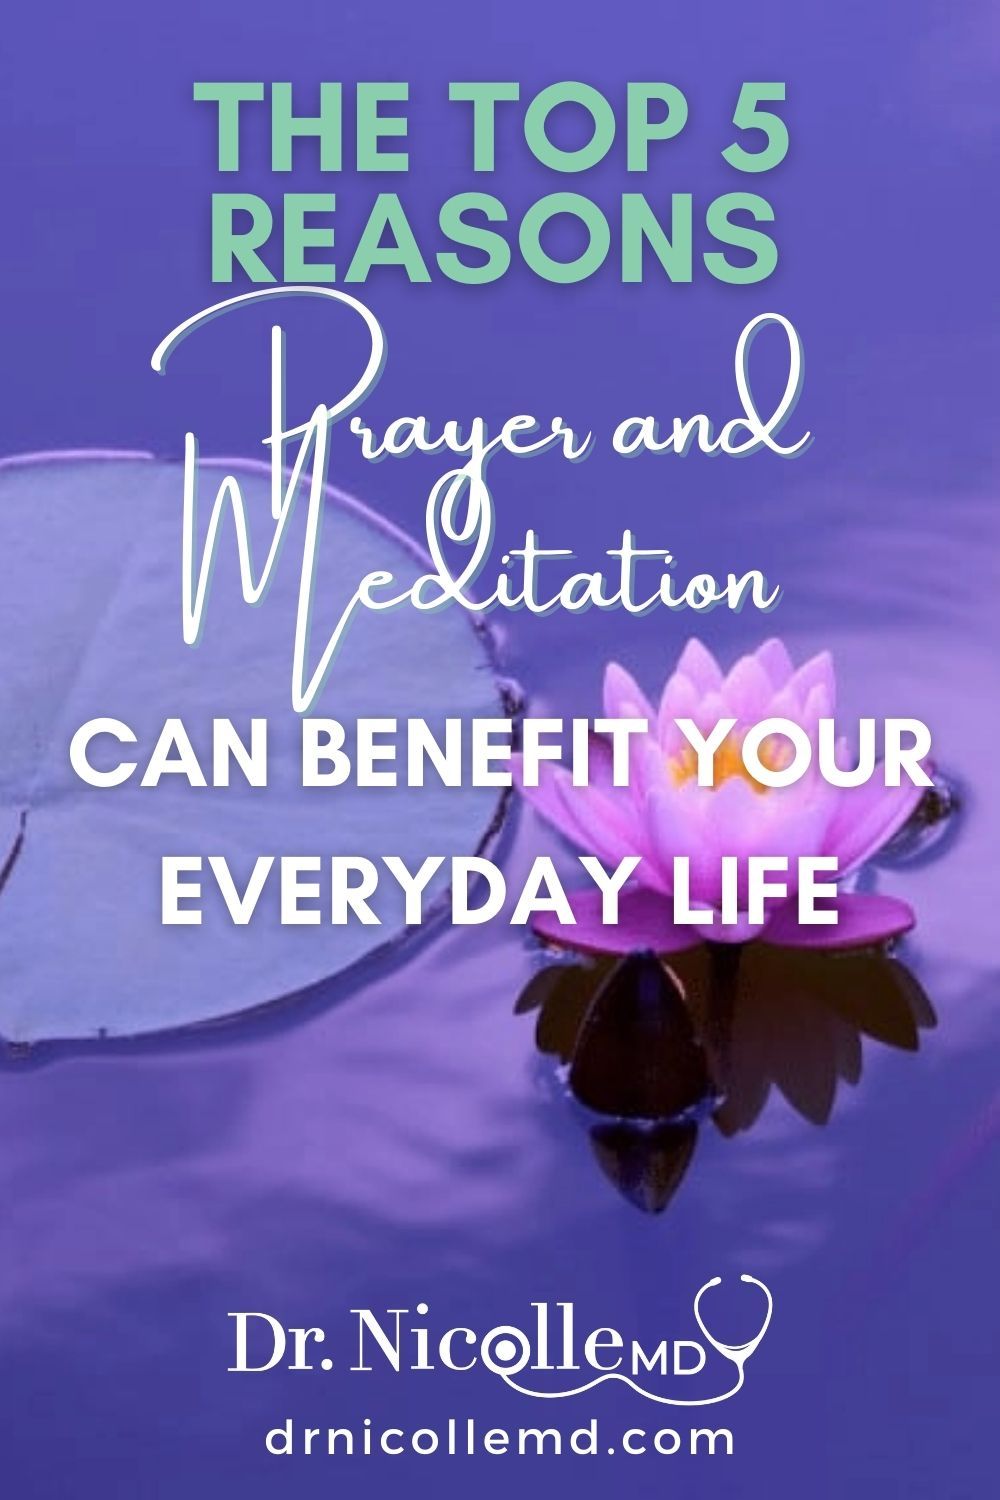 The Top 5 Reasons Prayer and Meditation Can Benefit Your Everyday Life